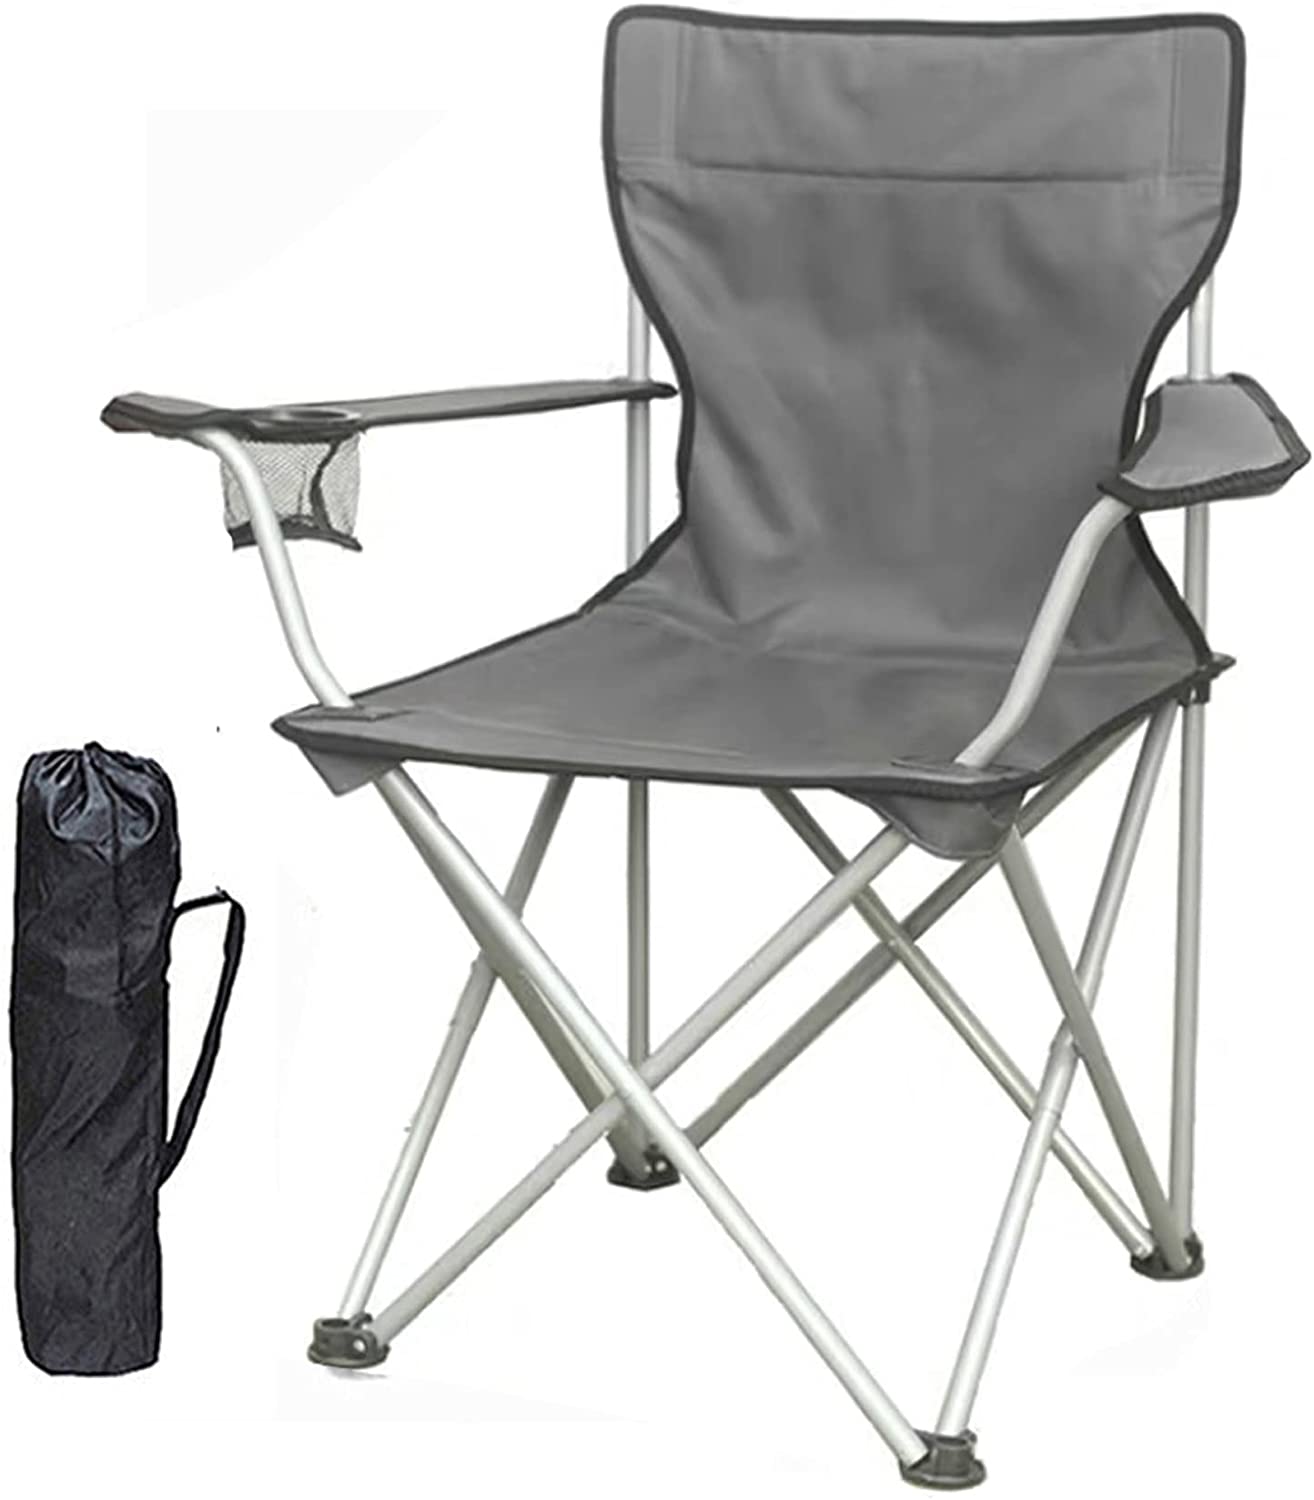 HOMOH Camping Folding Chair Ultralight Portable Folding Backpacking Chair Lightweight Easy Carried for Outdoor Picnic Beach